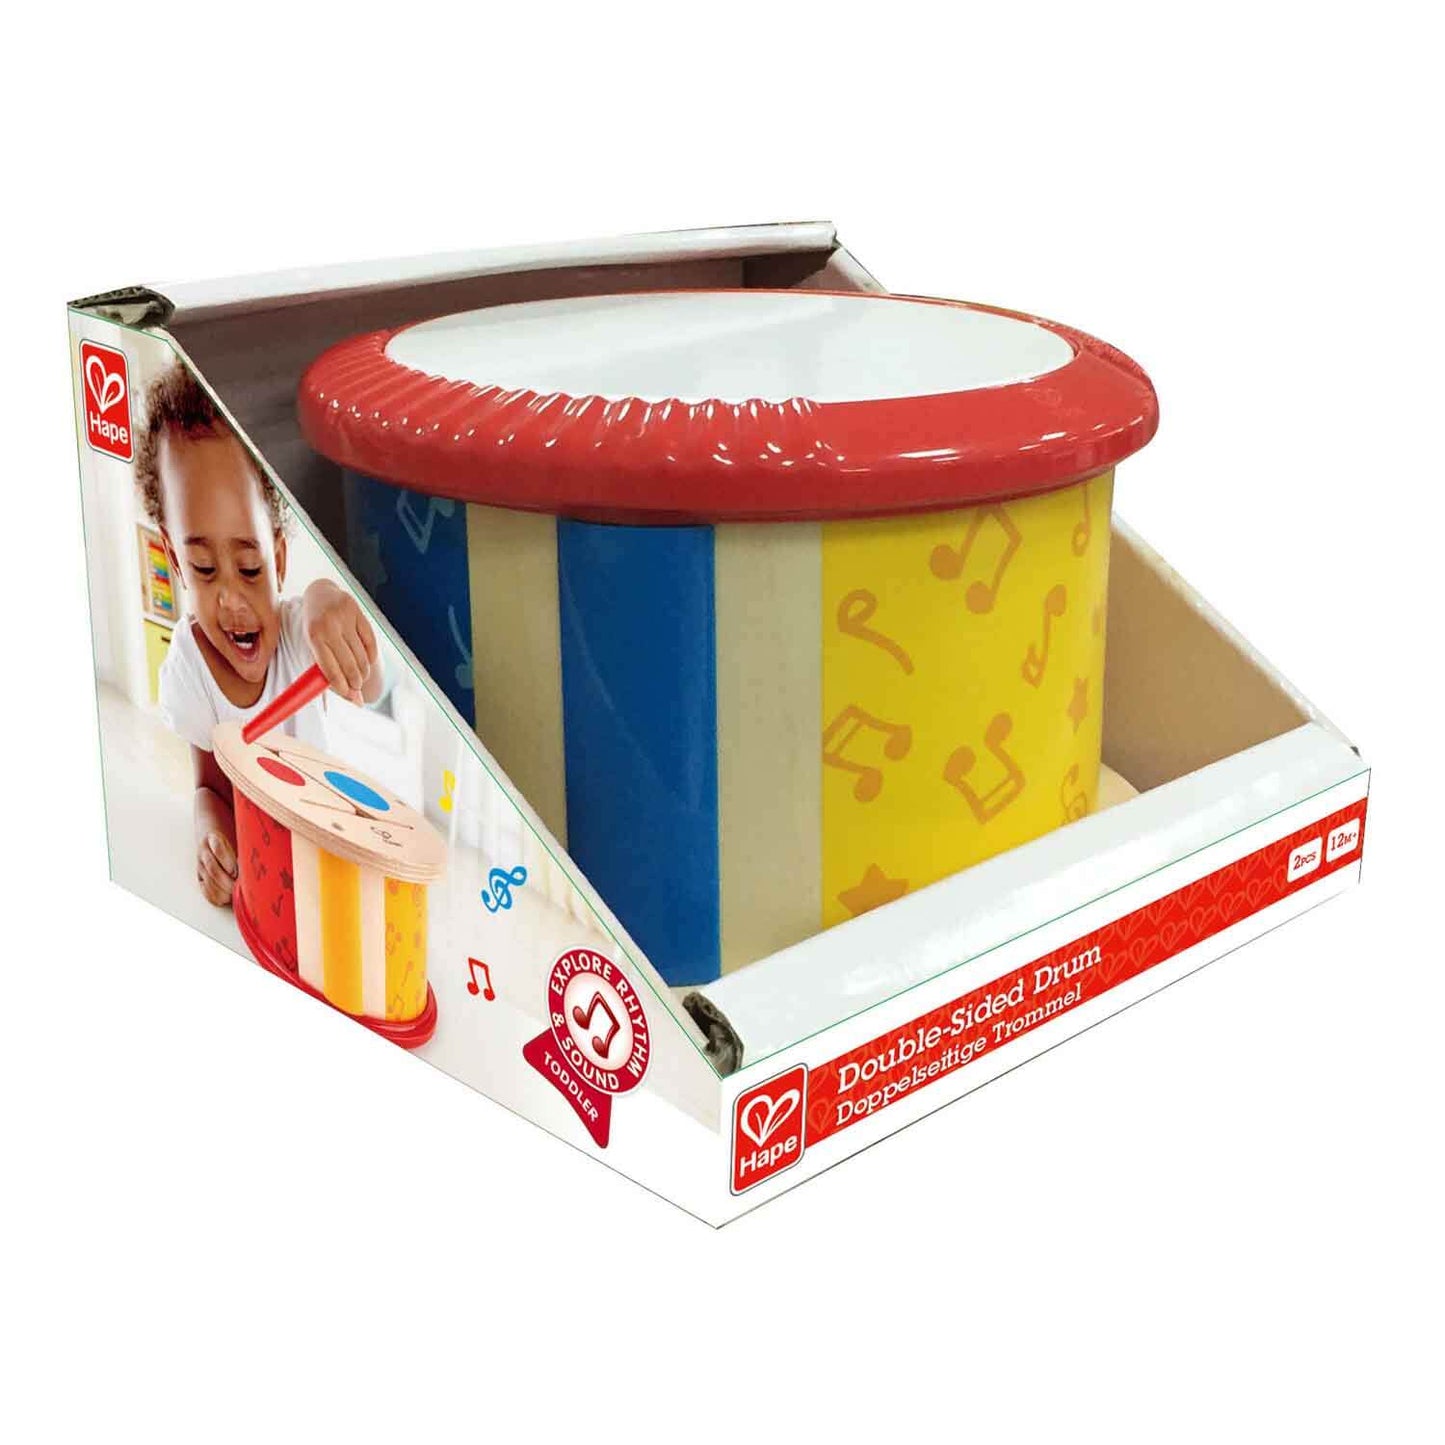 Hape two-sided drum